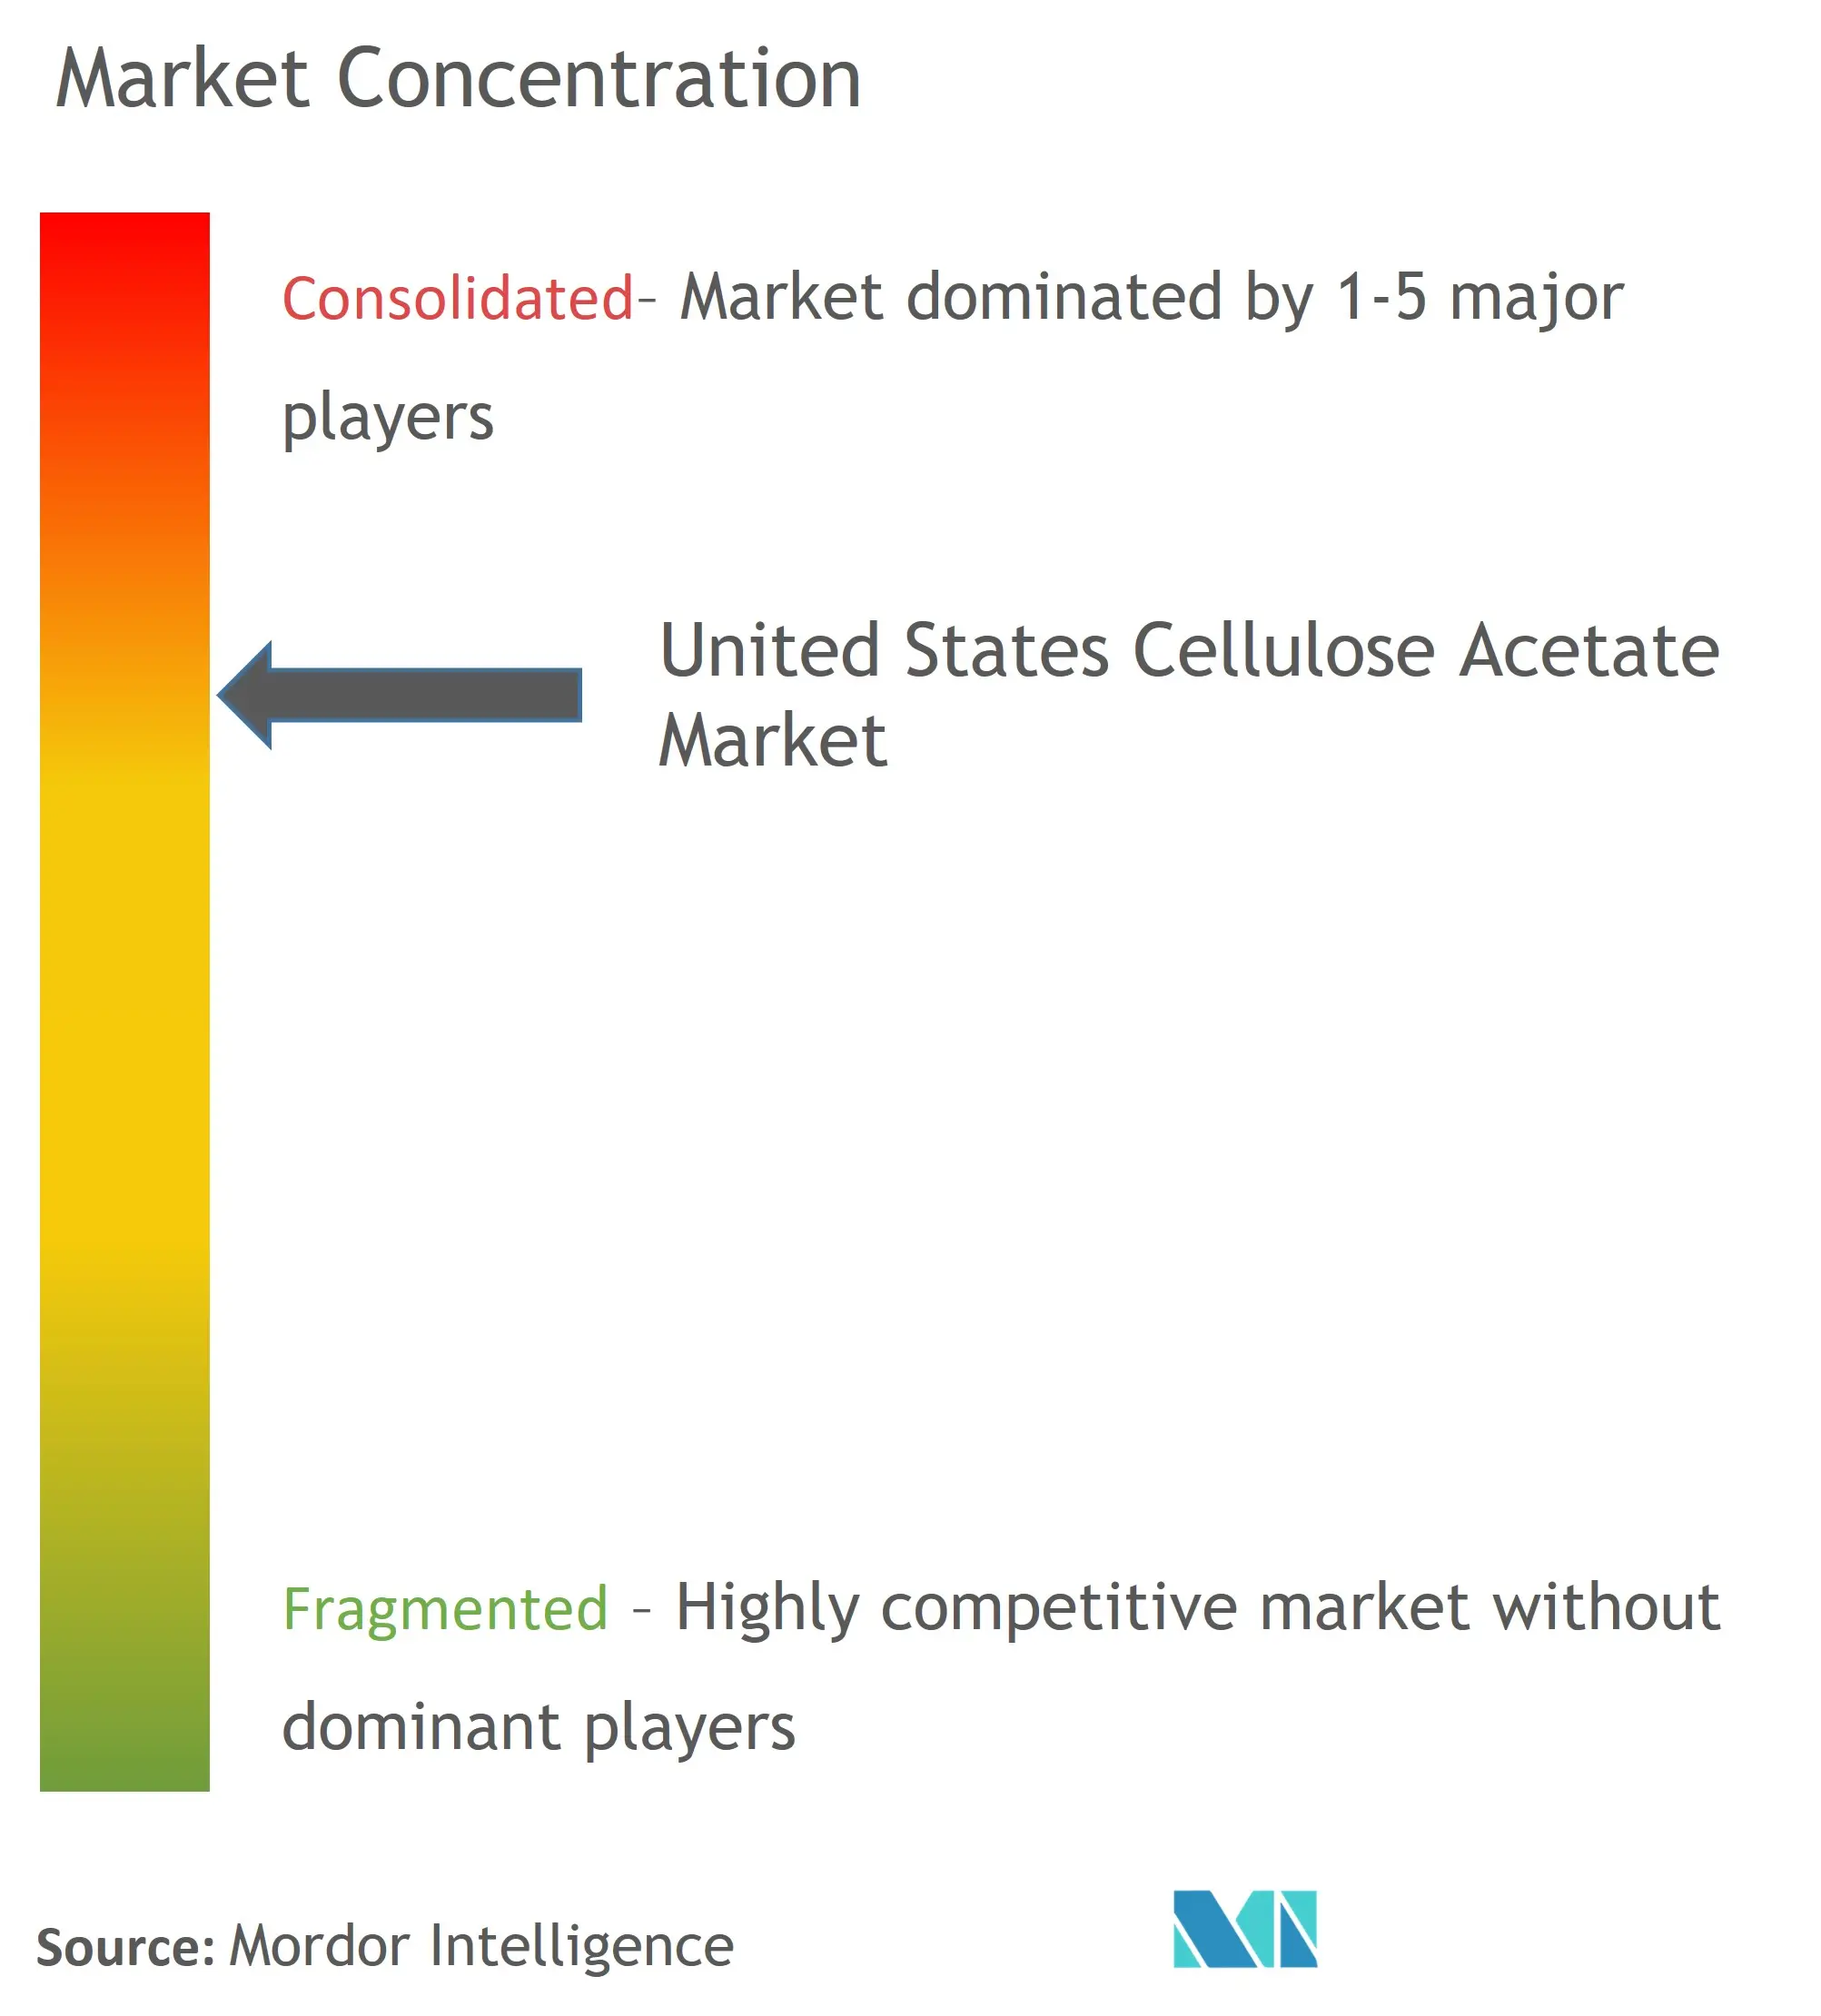 United States Cellulose Acetate Market Concentration